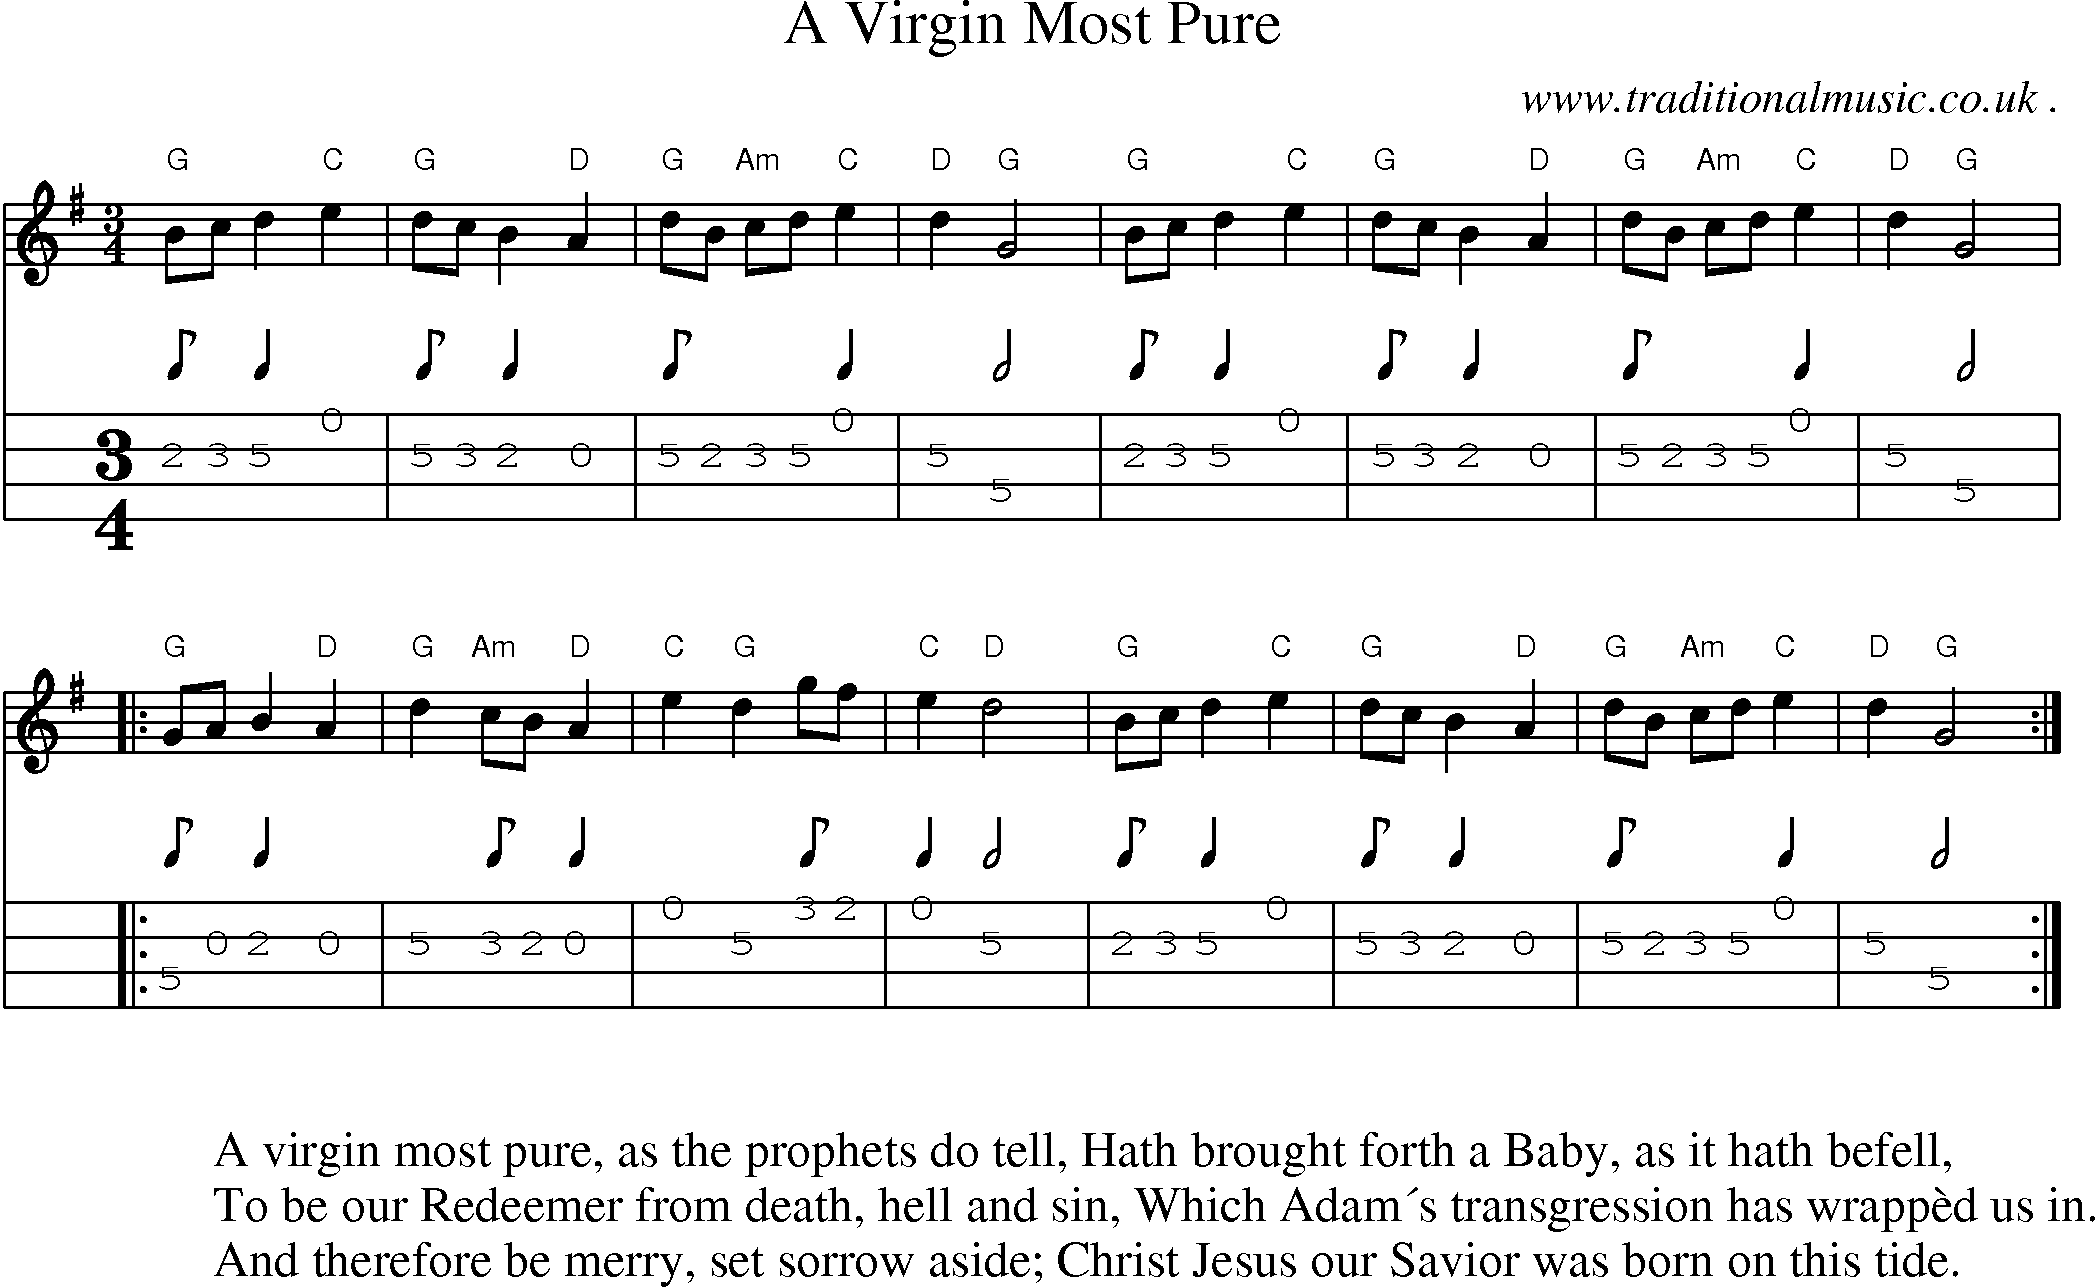 Music Score and Guitar Tabs for A Virgin Most Pure